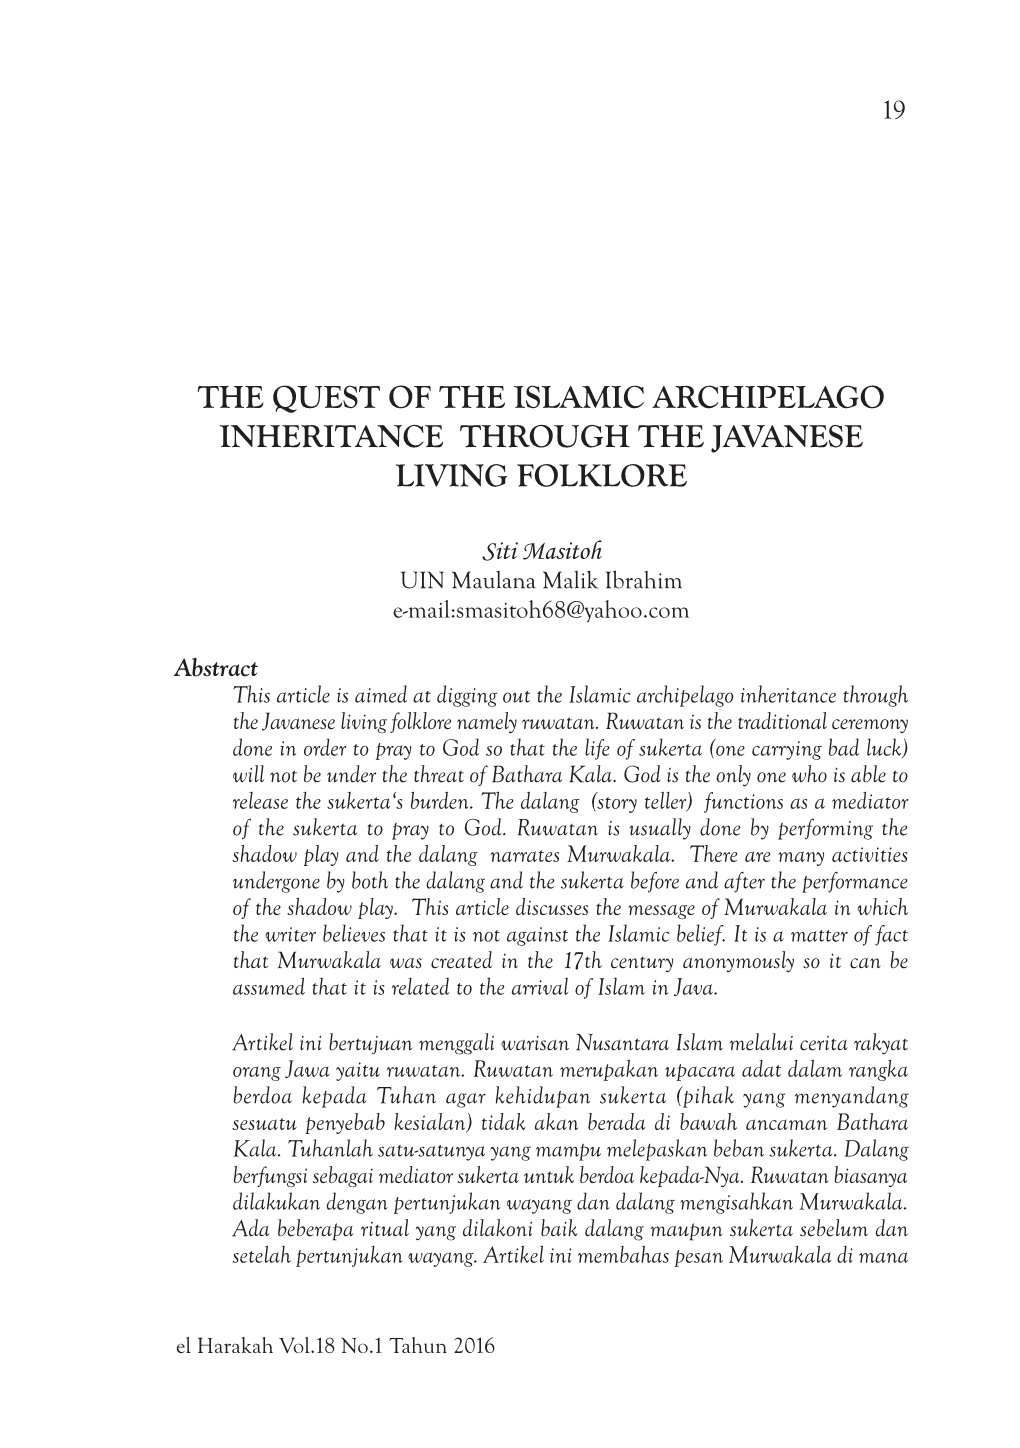 The Quest of the Islamic Archipelago Inheritance Through the Javanese Living Folklore